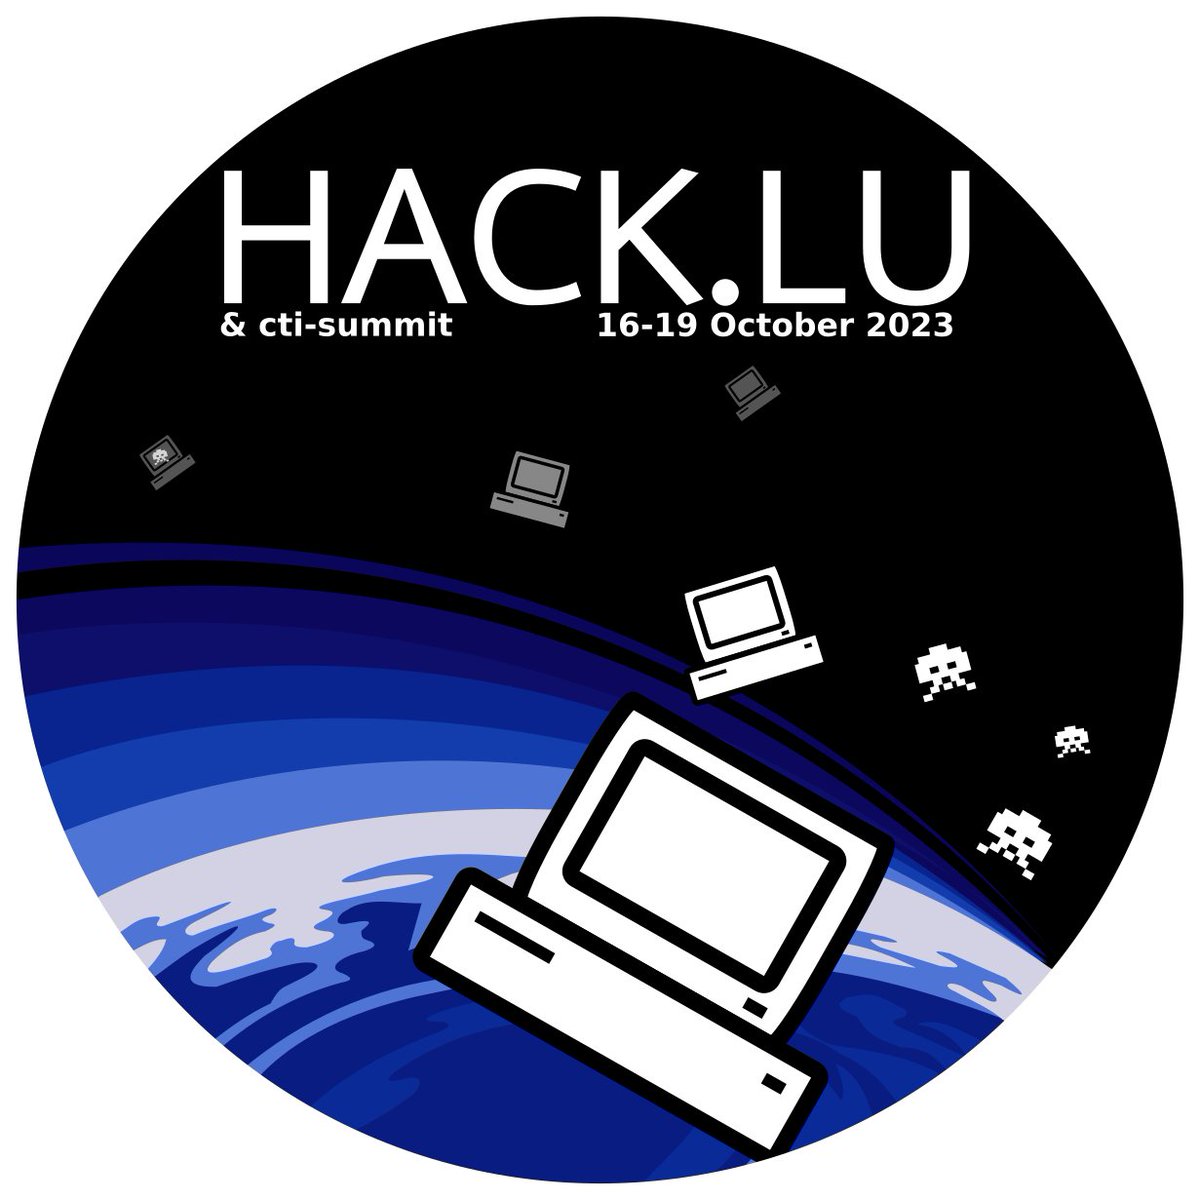 RH-ISAC's very own JJ Josing is presenting at @hack_lu in Luxembourg on October 16. Learn more about his session and conference here: ow.ly/jhCz50PQ98y